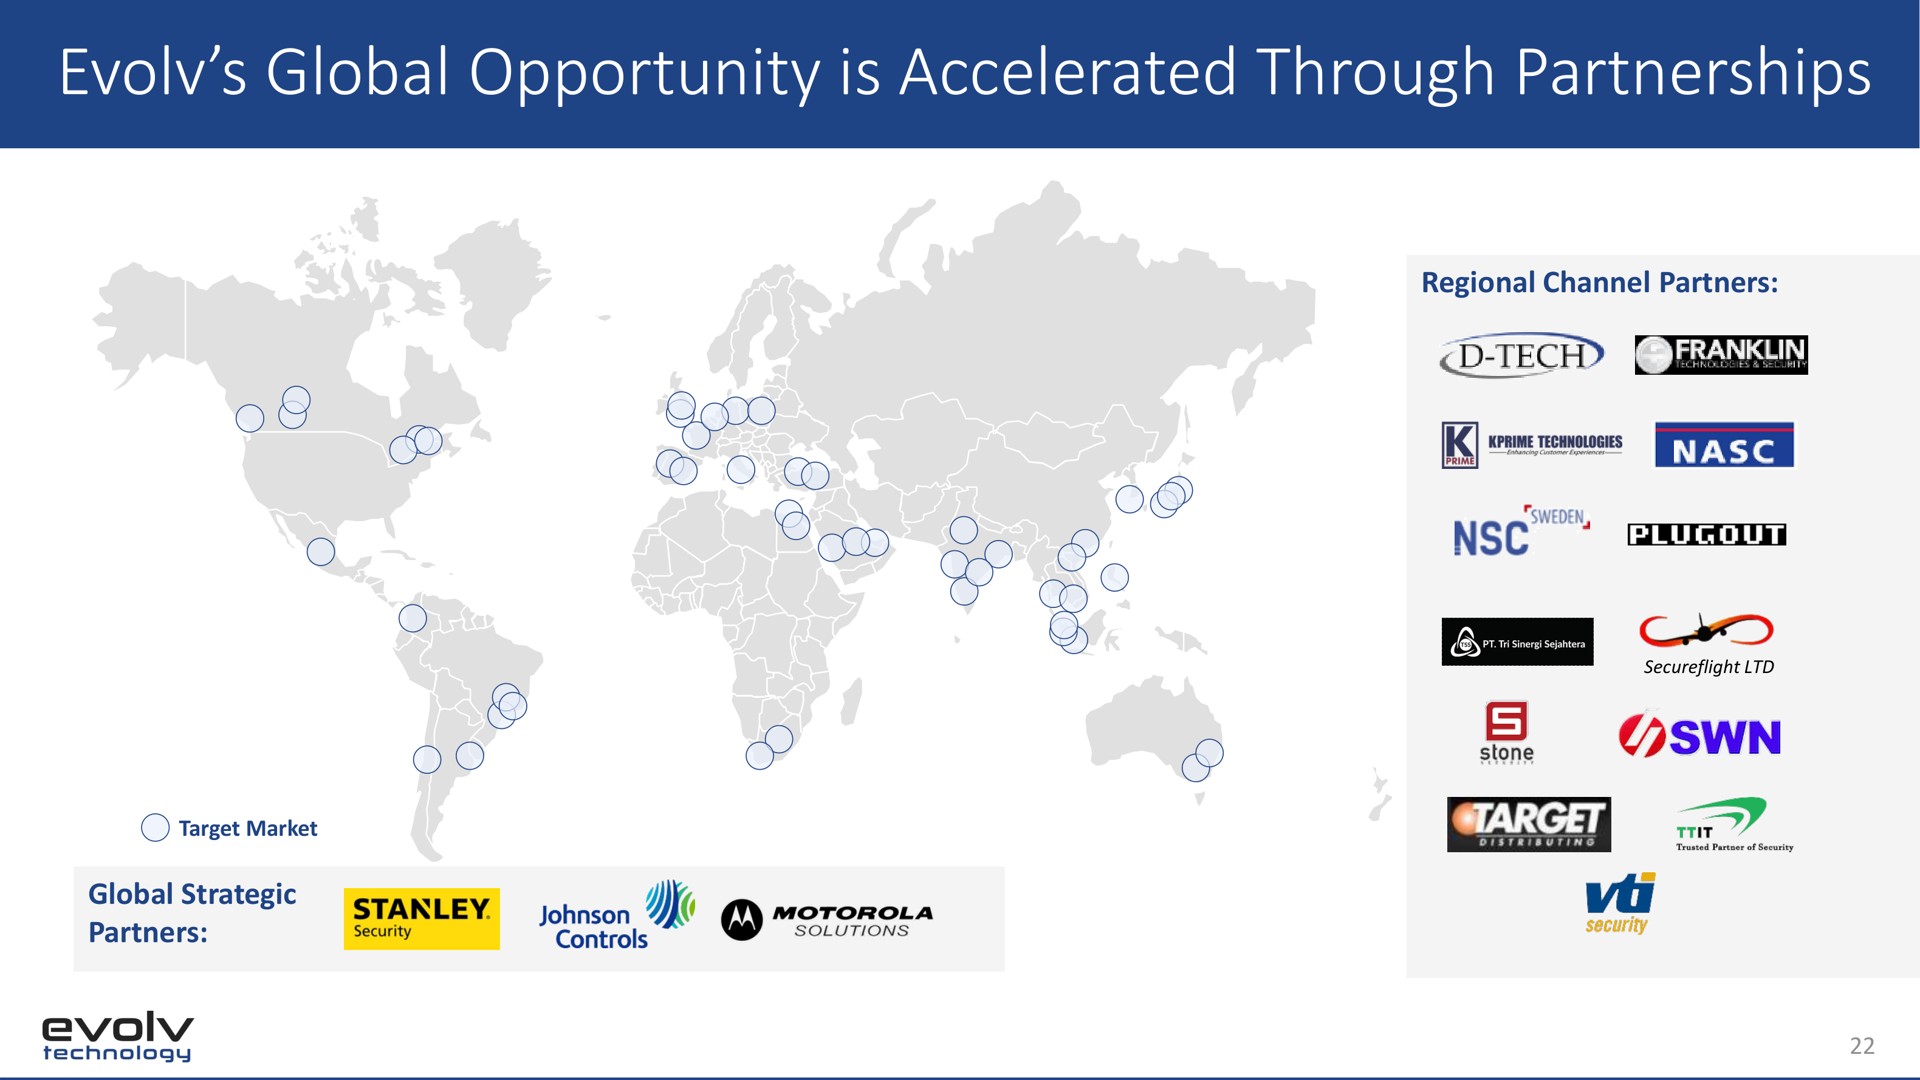 global opportunity is accelerated through partnerships | Evolv